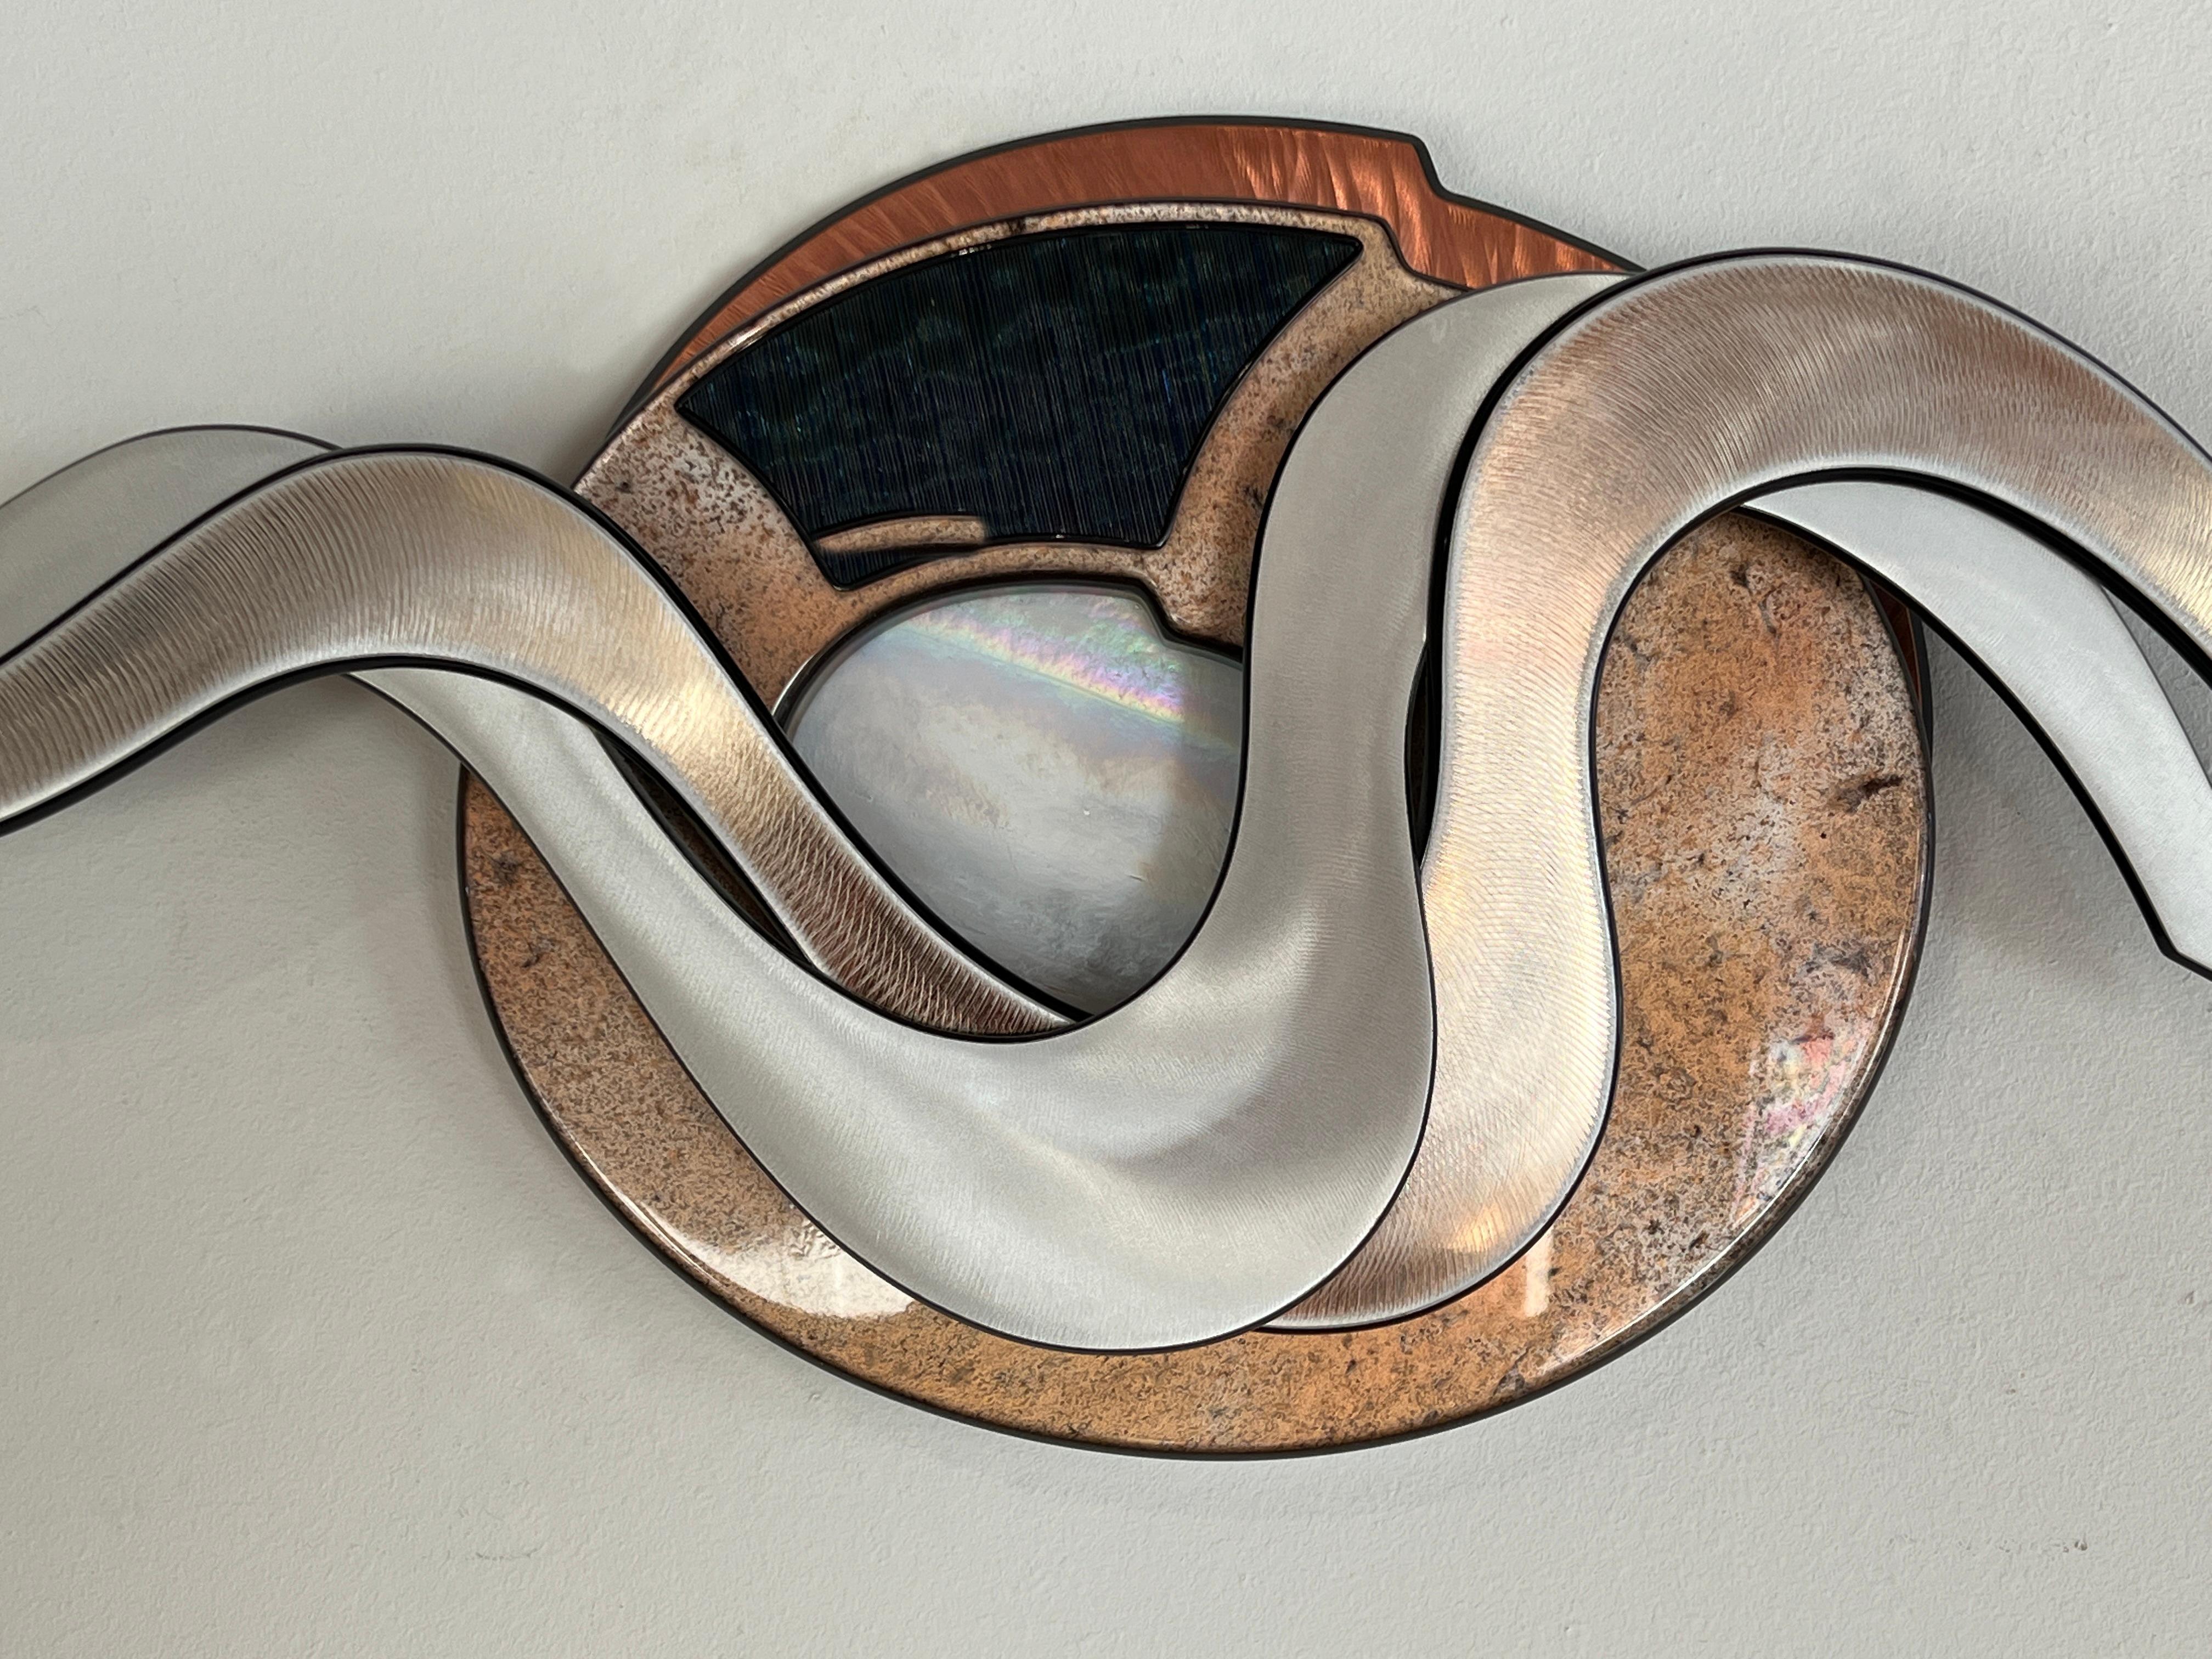 Craig French is a contemporary pop-Constructivist sculptor, whose brilliant, lyrical wall pieces have gained an international audience. Cast resins, acrylics, sheet metals, rare woods, and glass are laboriously cut, lathed, and polished into